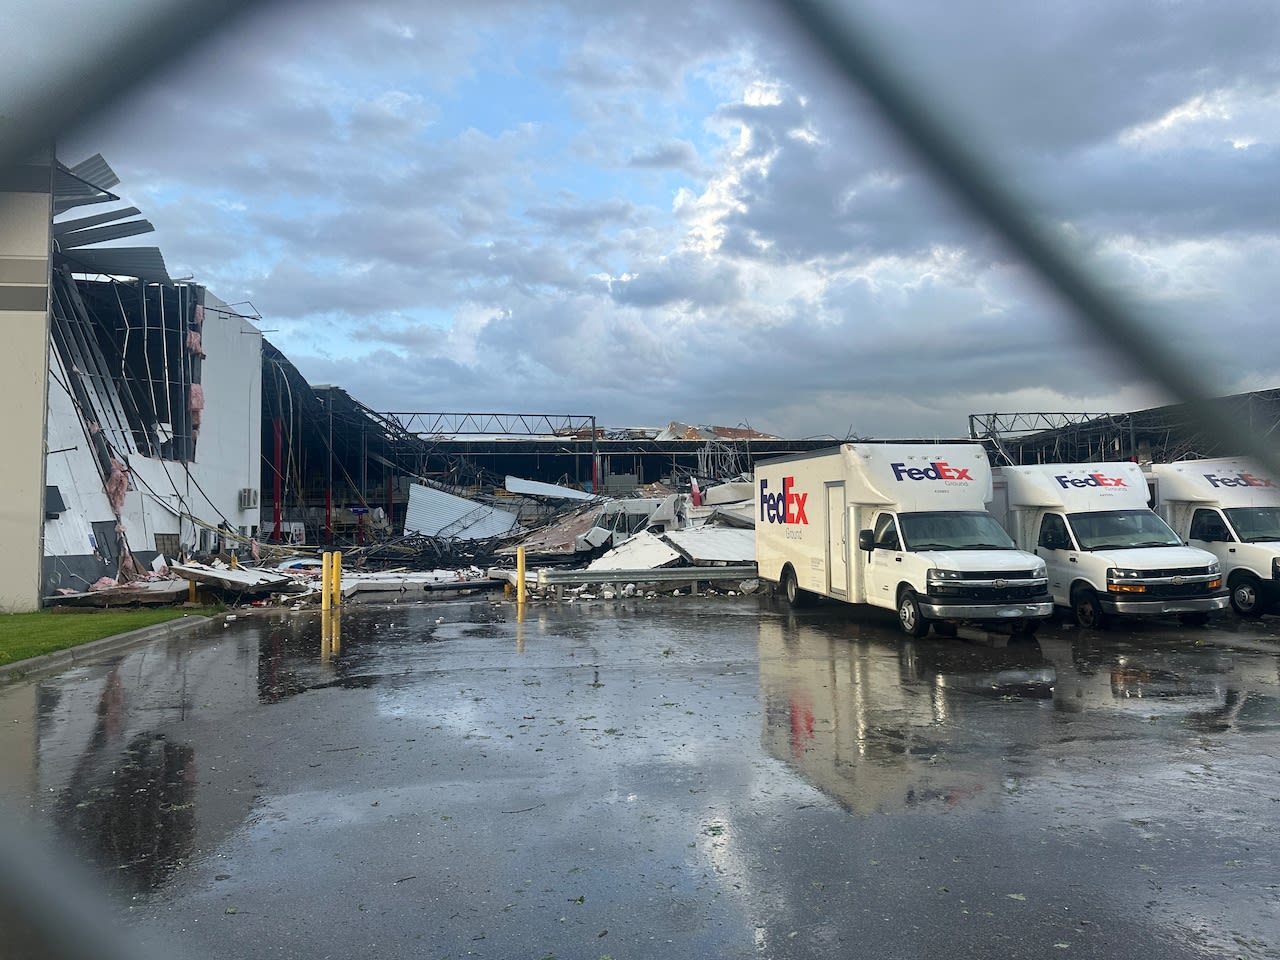 Major damage reported at FedEx facility in Portage from possible tornado